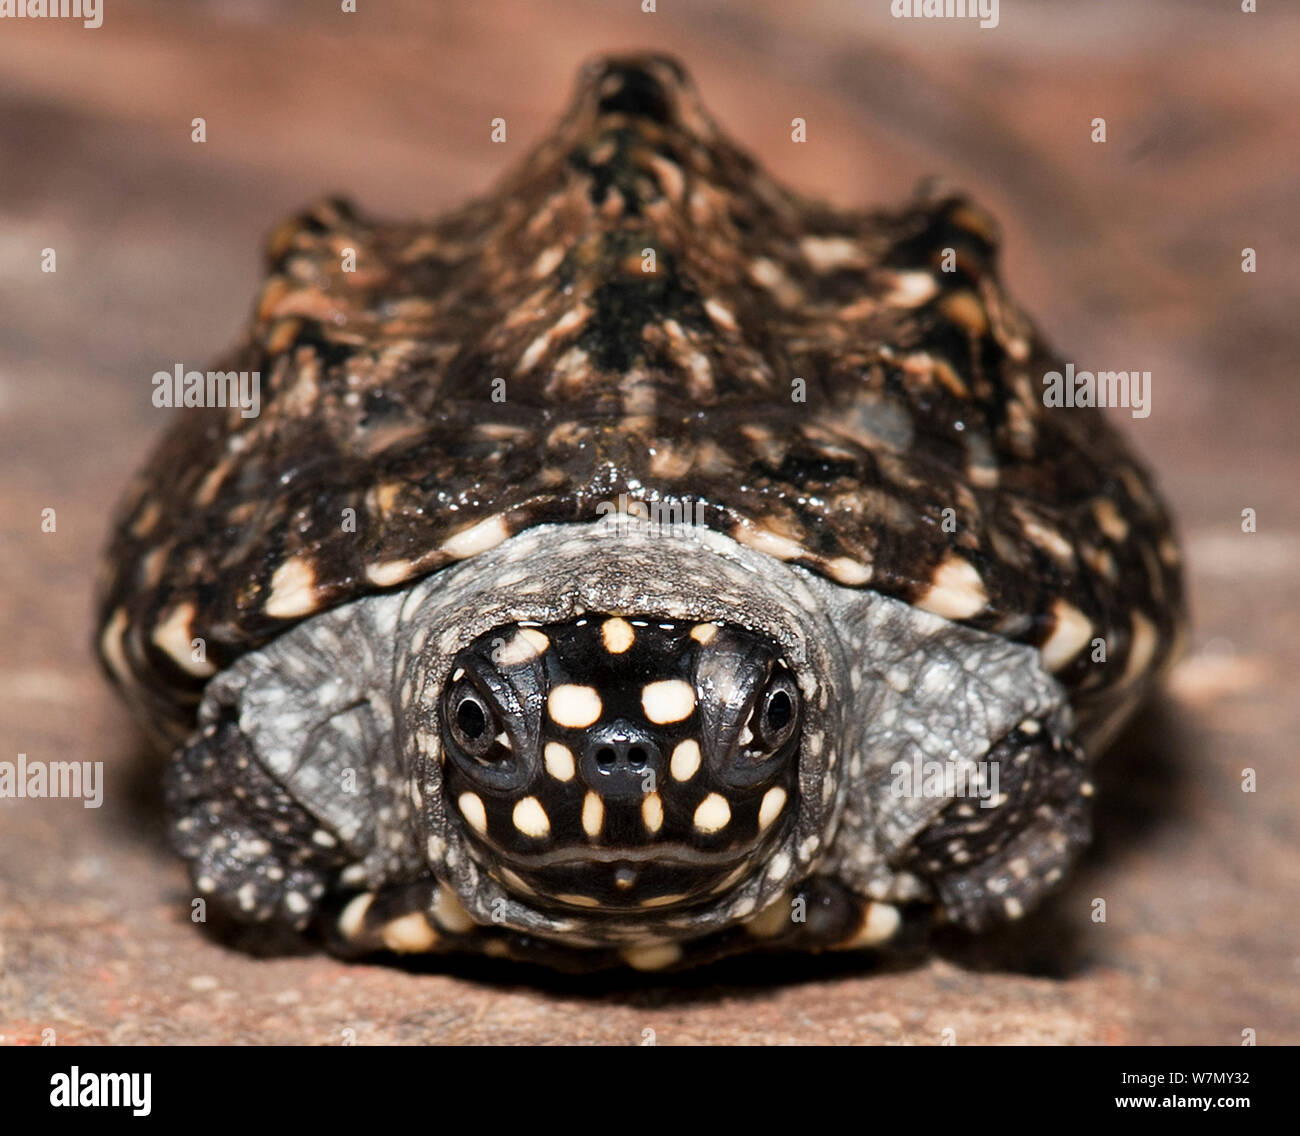 Black / Indian spotted pond turtle (Geoclemys hamiltonii) captive, from Asia Stock Photo